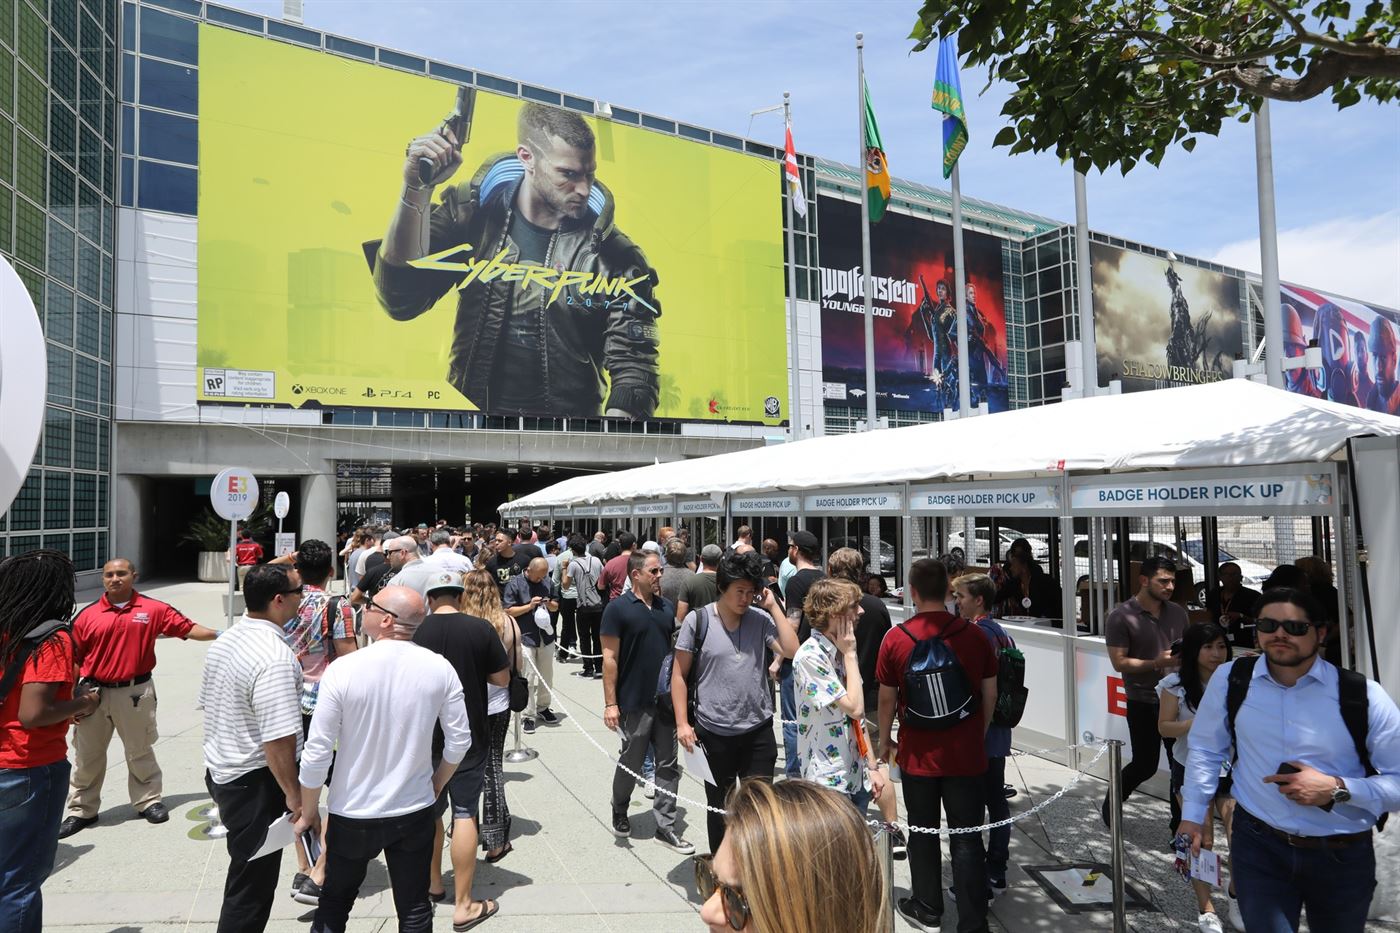 E3 is an annual video game exposition held at the Los Angeles Convention Center. Photo courtesy of E3